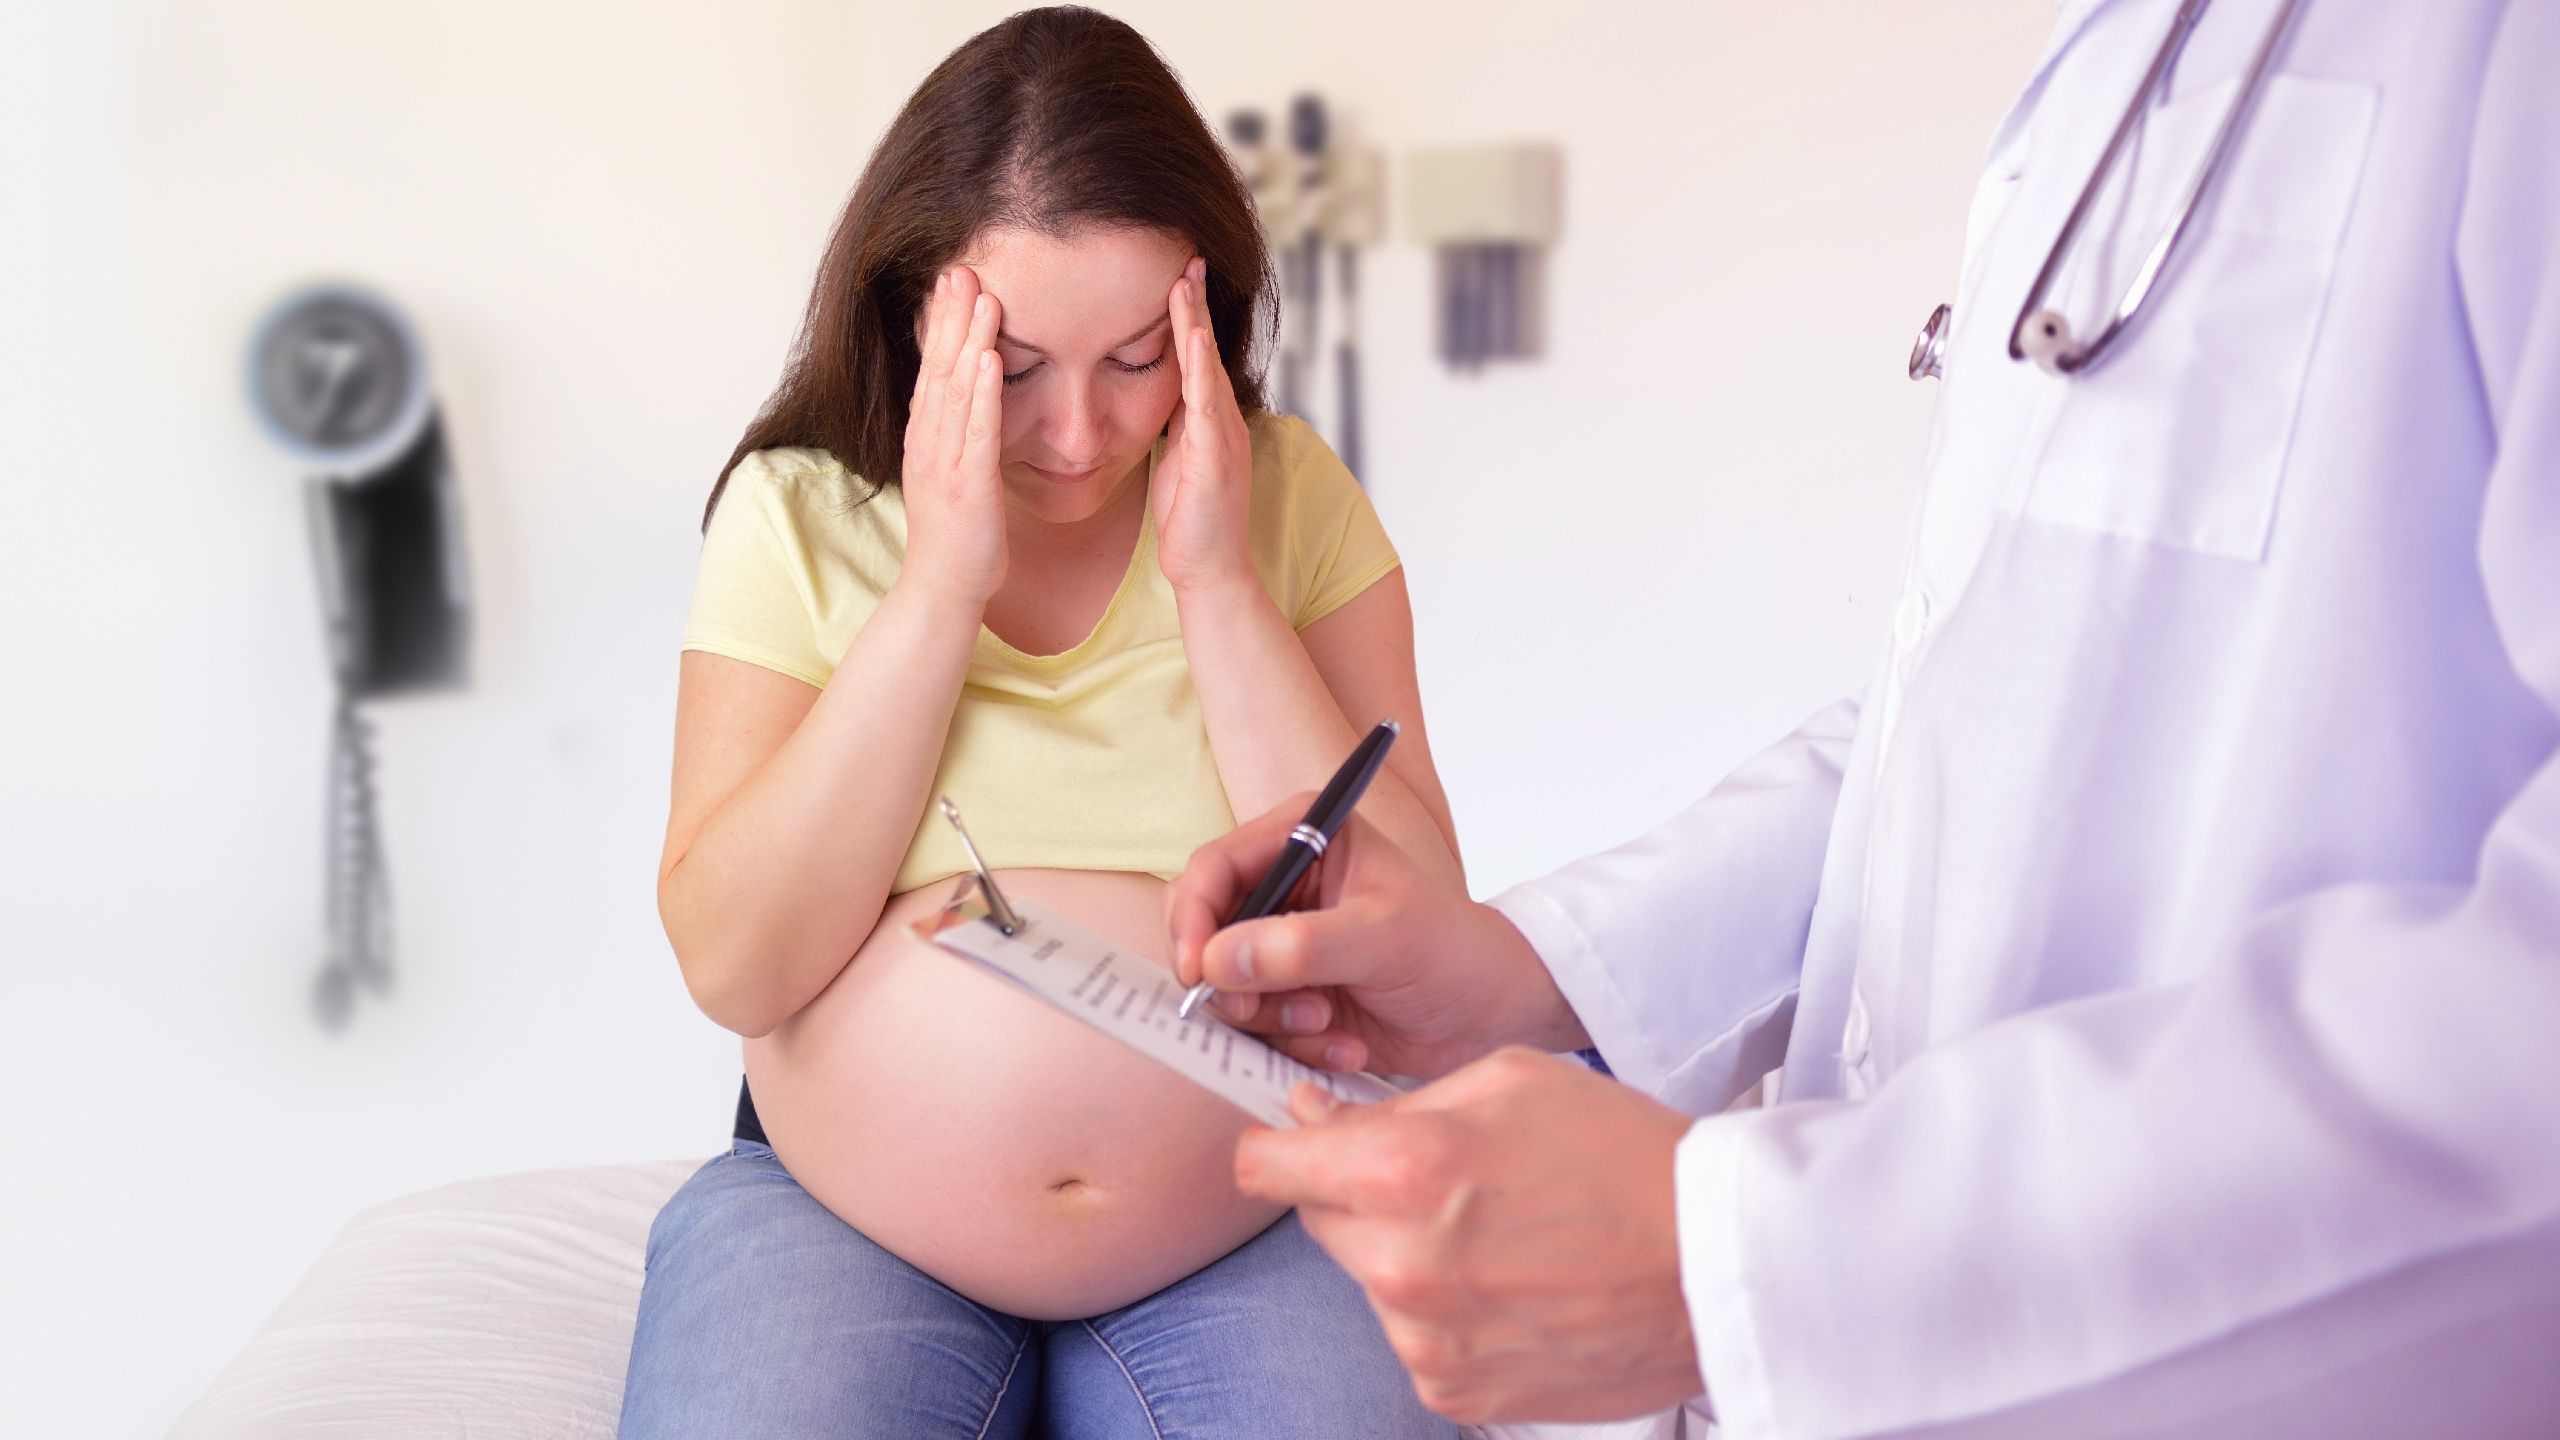 Stressed pregnant woman at the doctors